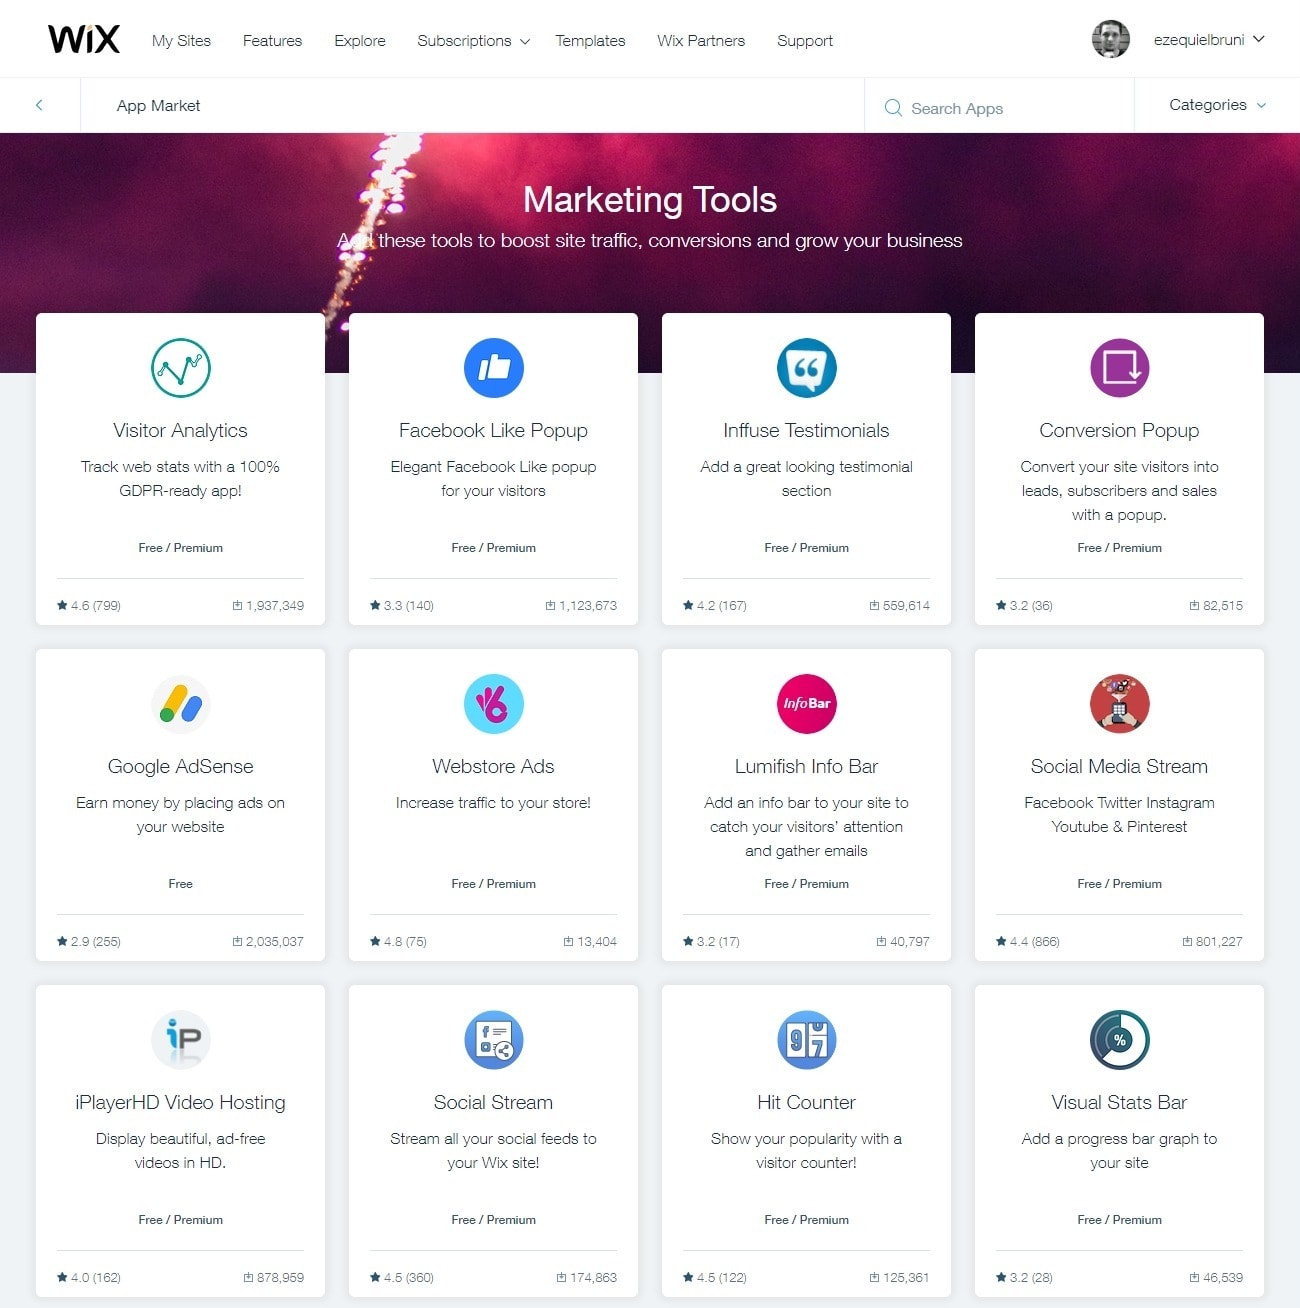 Wix marketing tools in the Wix App Market